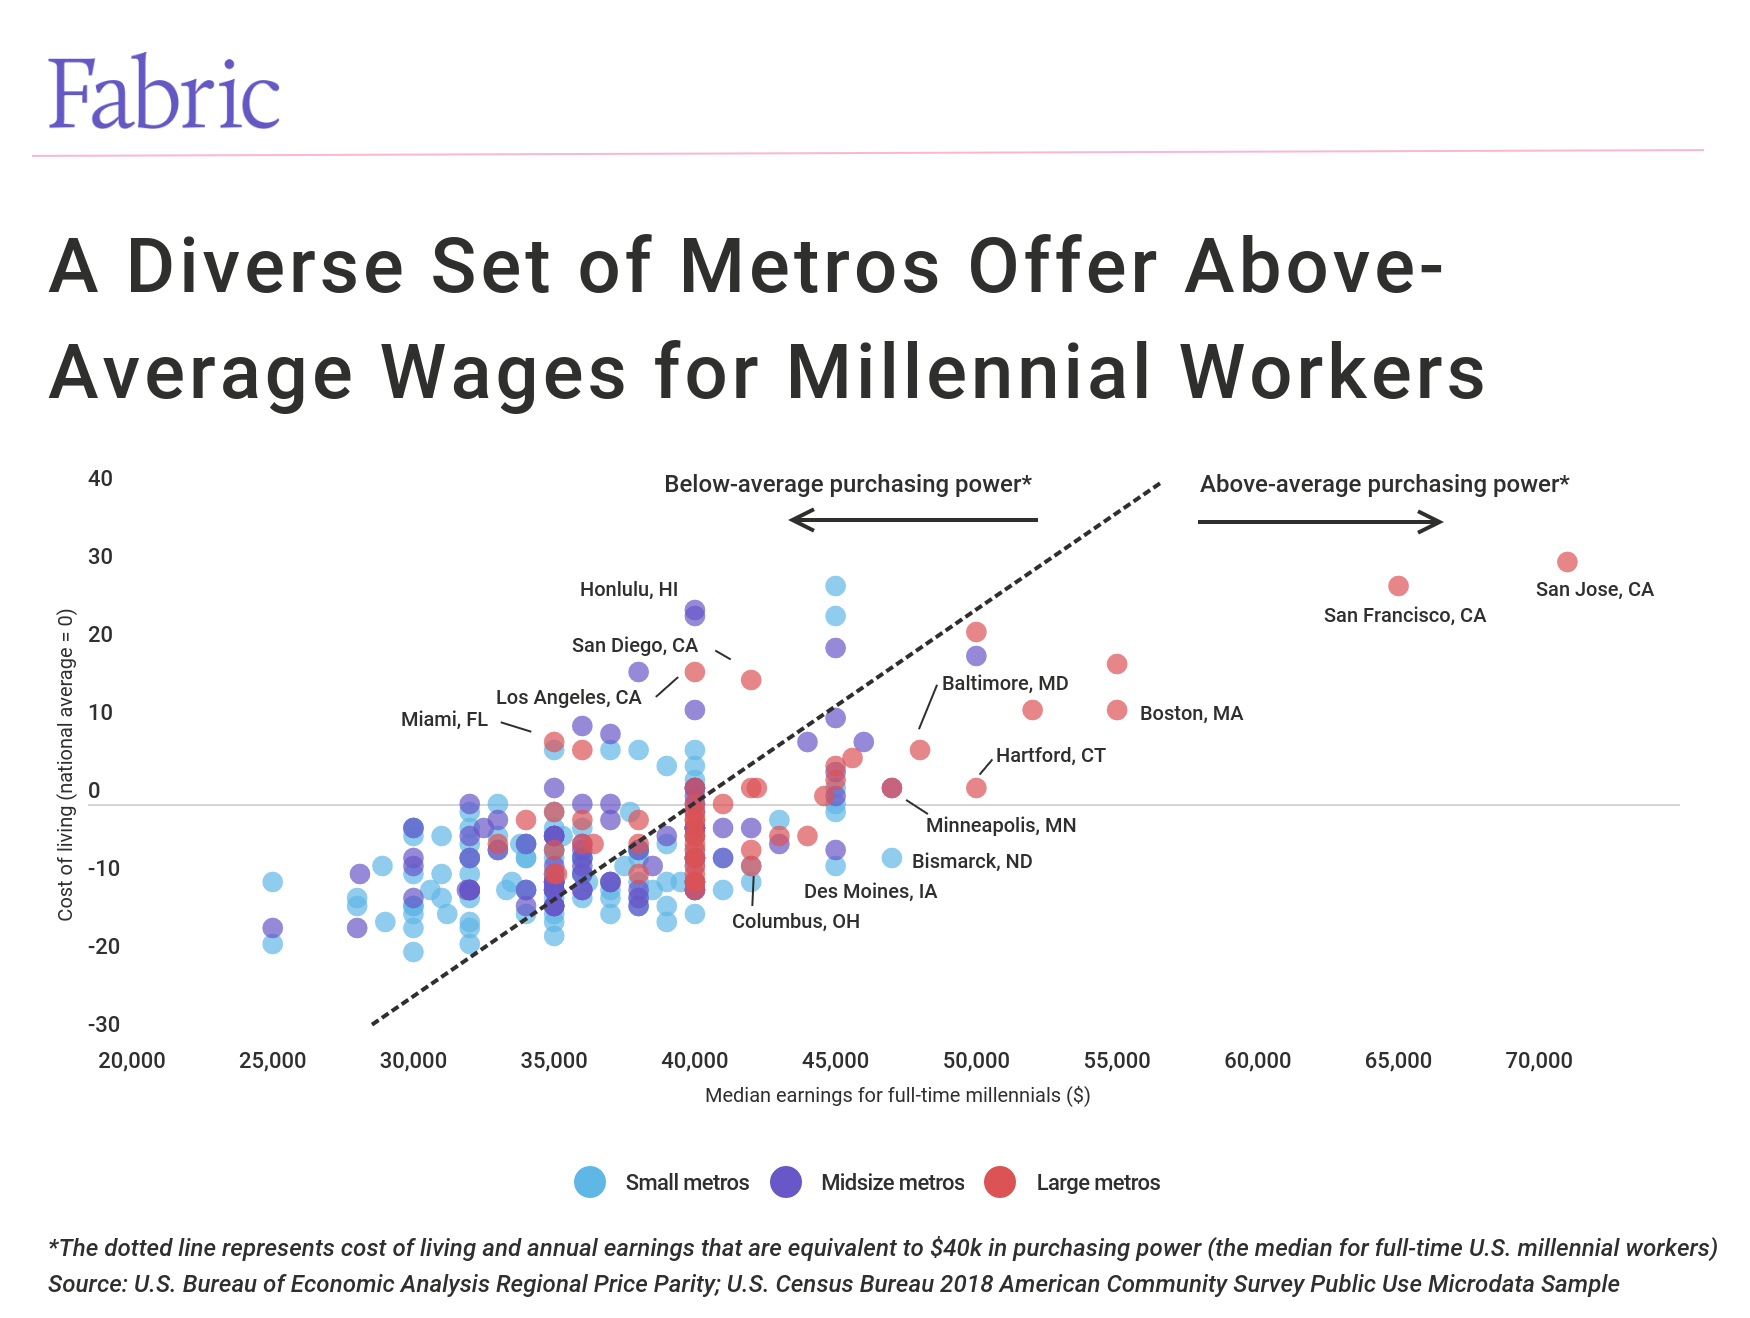 Scatter plot with a line depicting the average, charting cost of living against wages for millennial workers in different cities